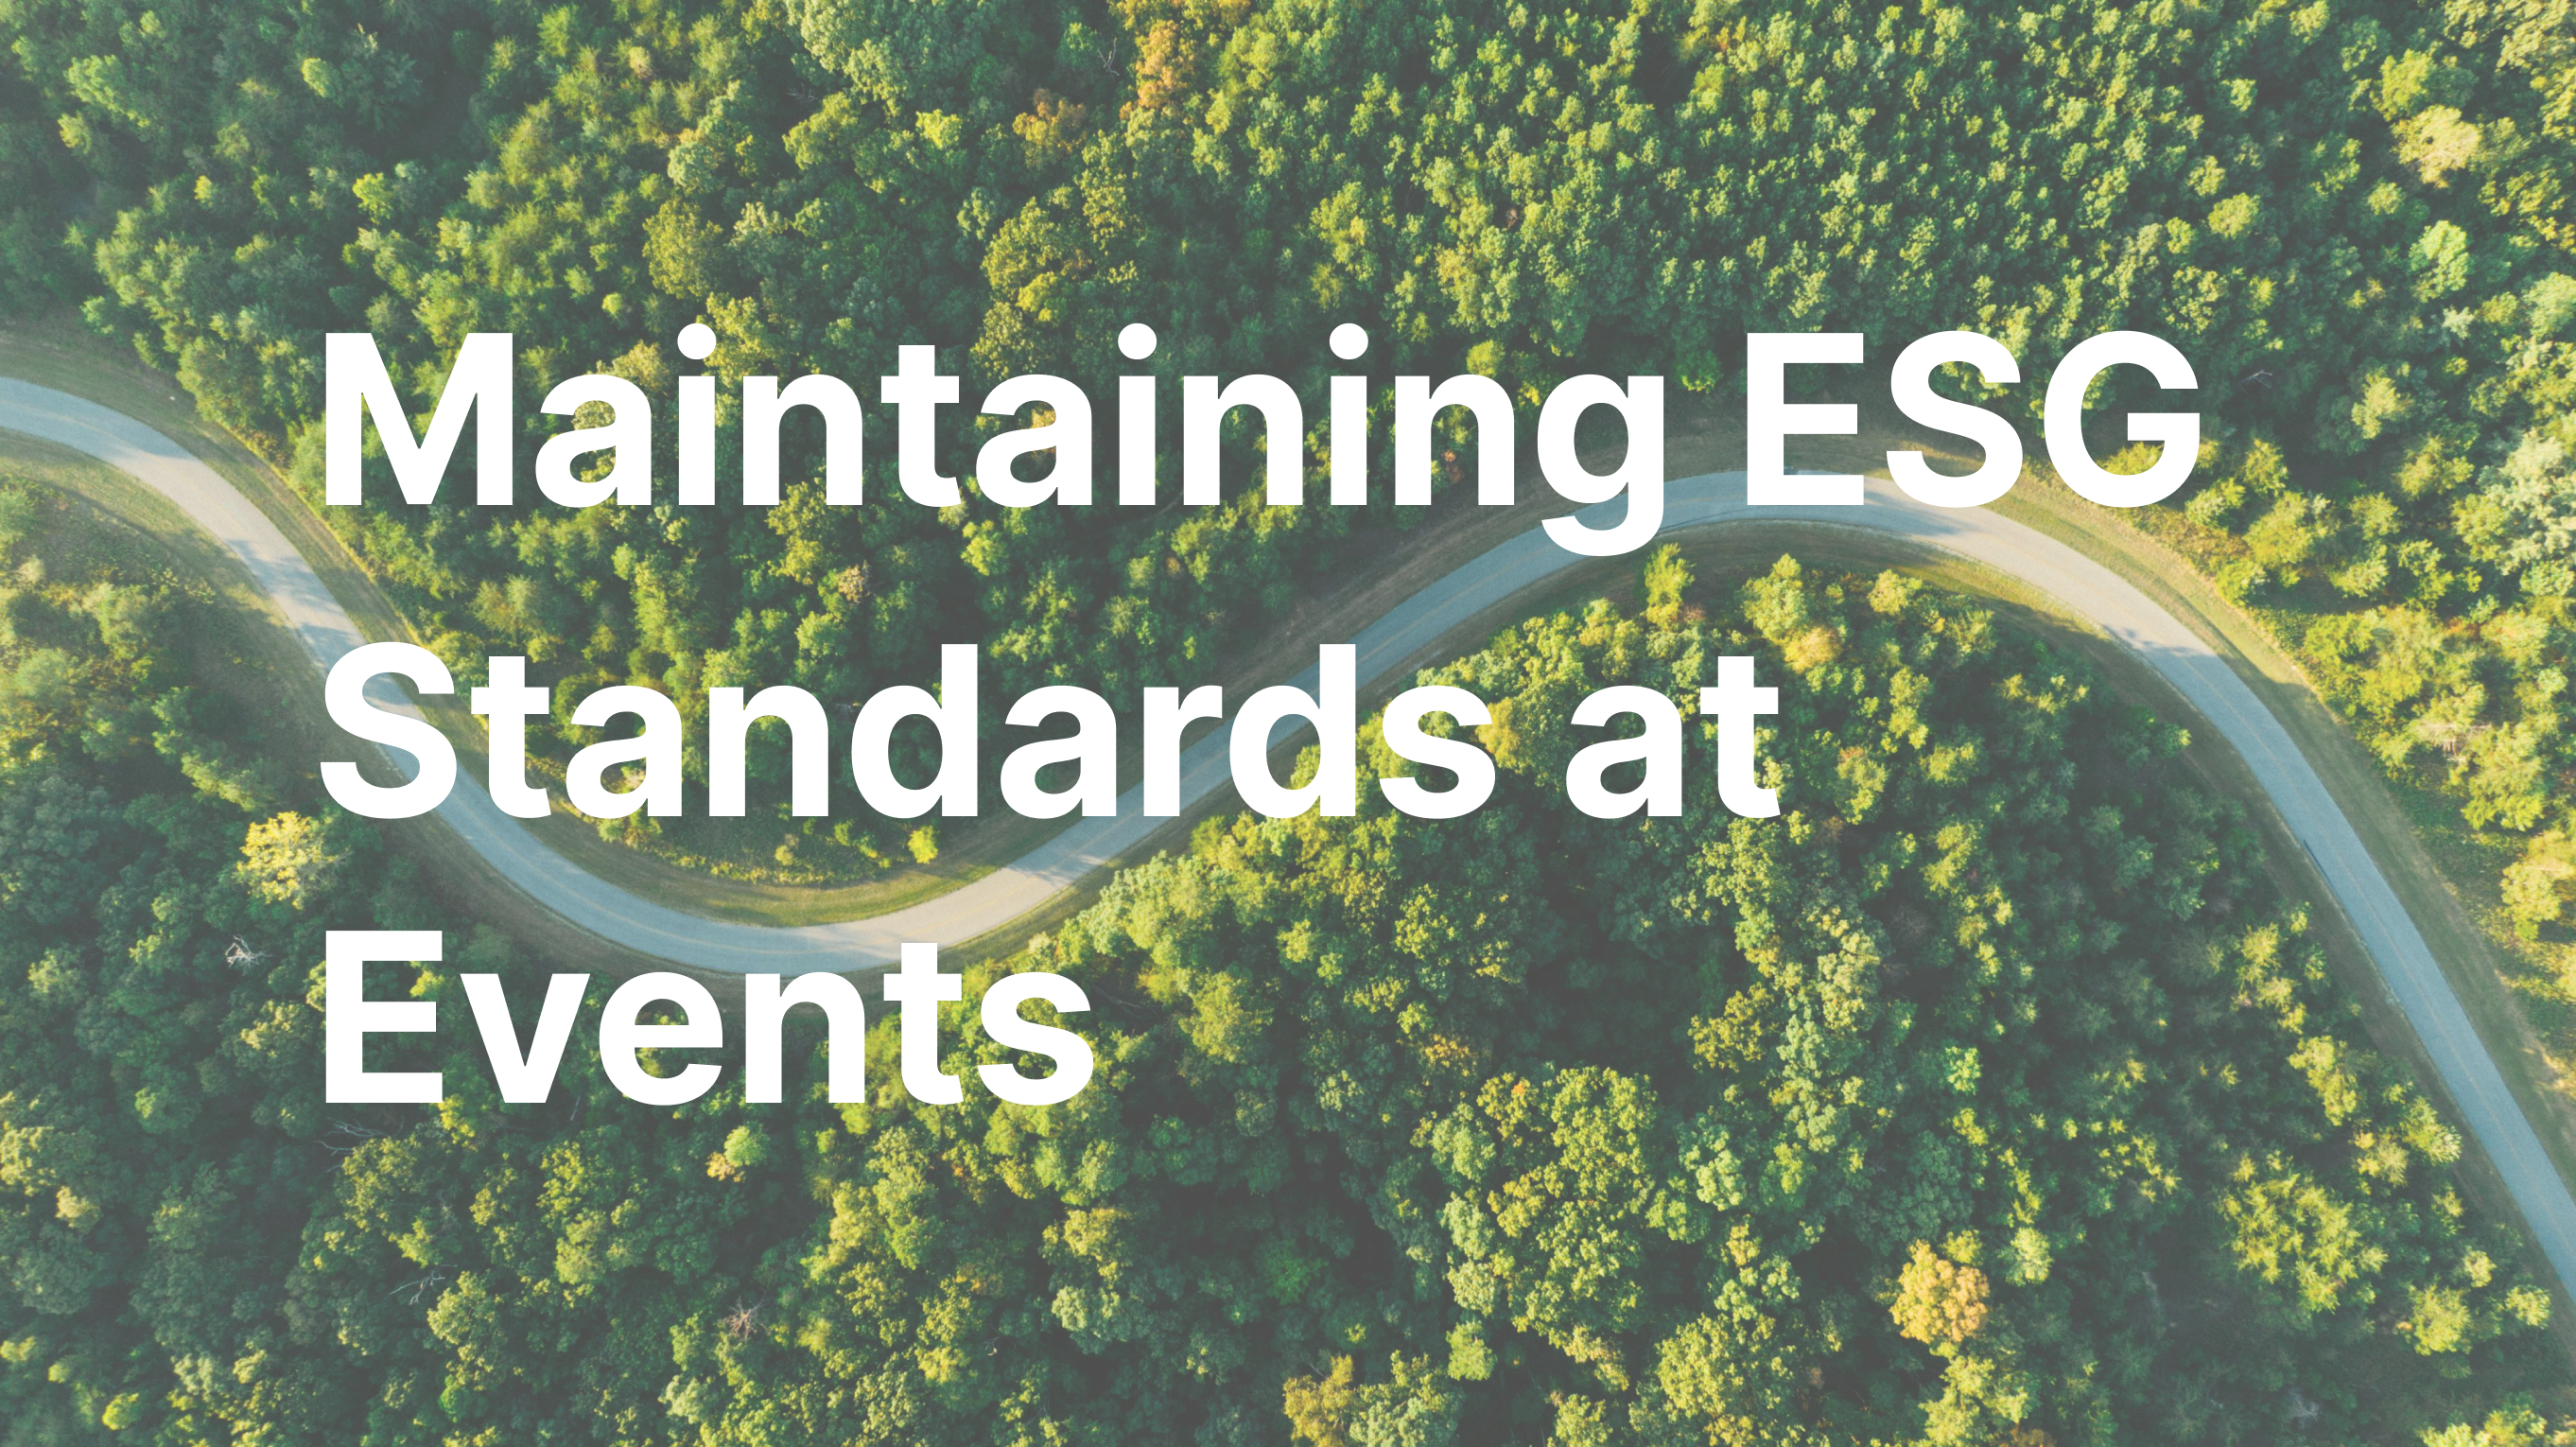 Image showing text: maintaining ESG standards at events.